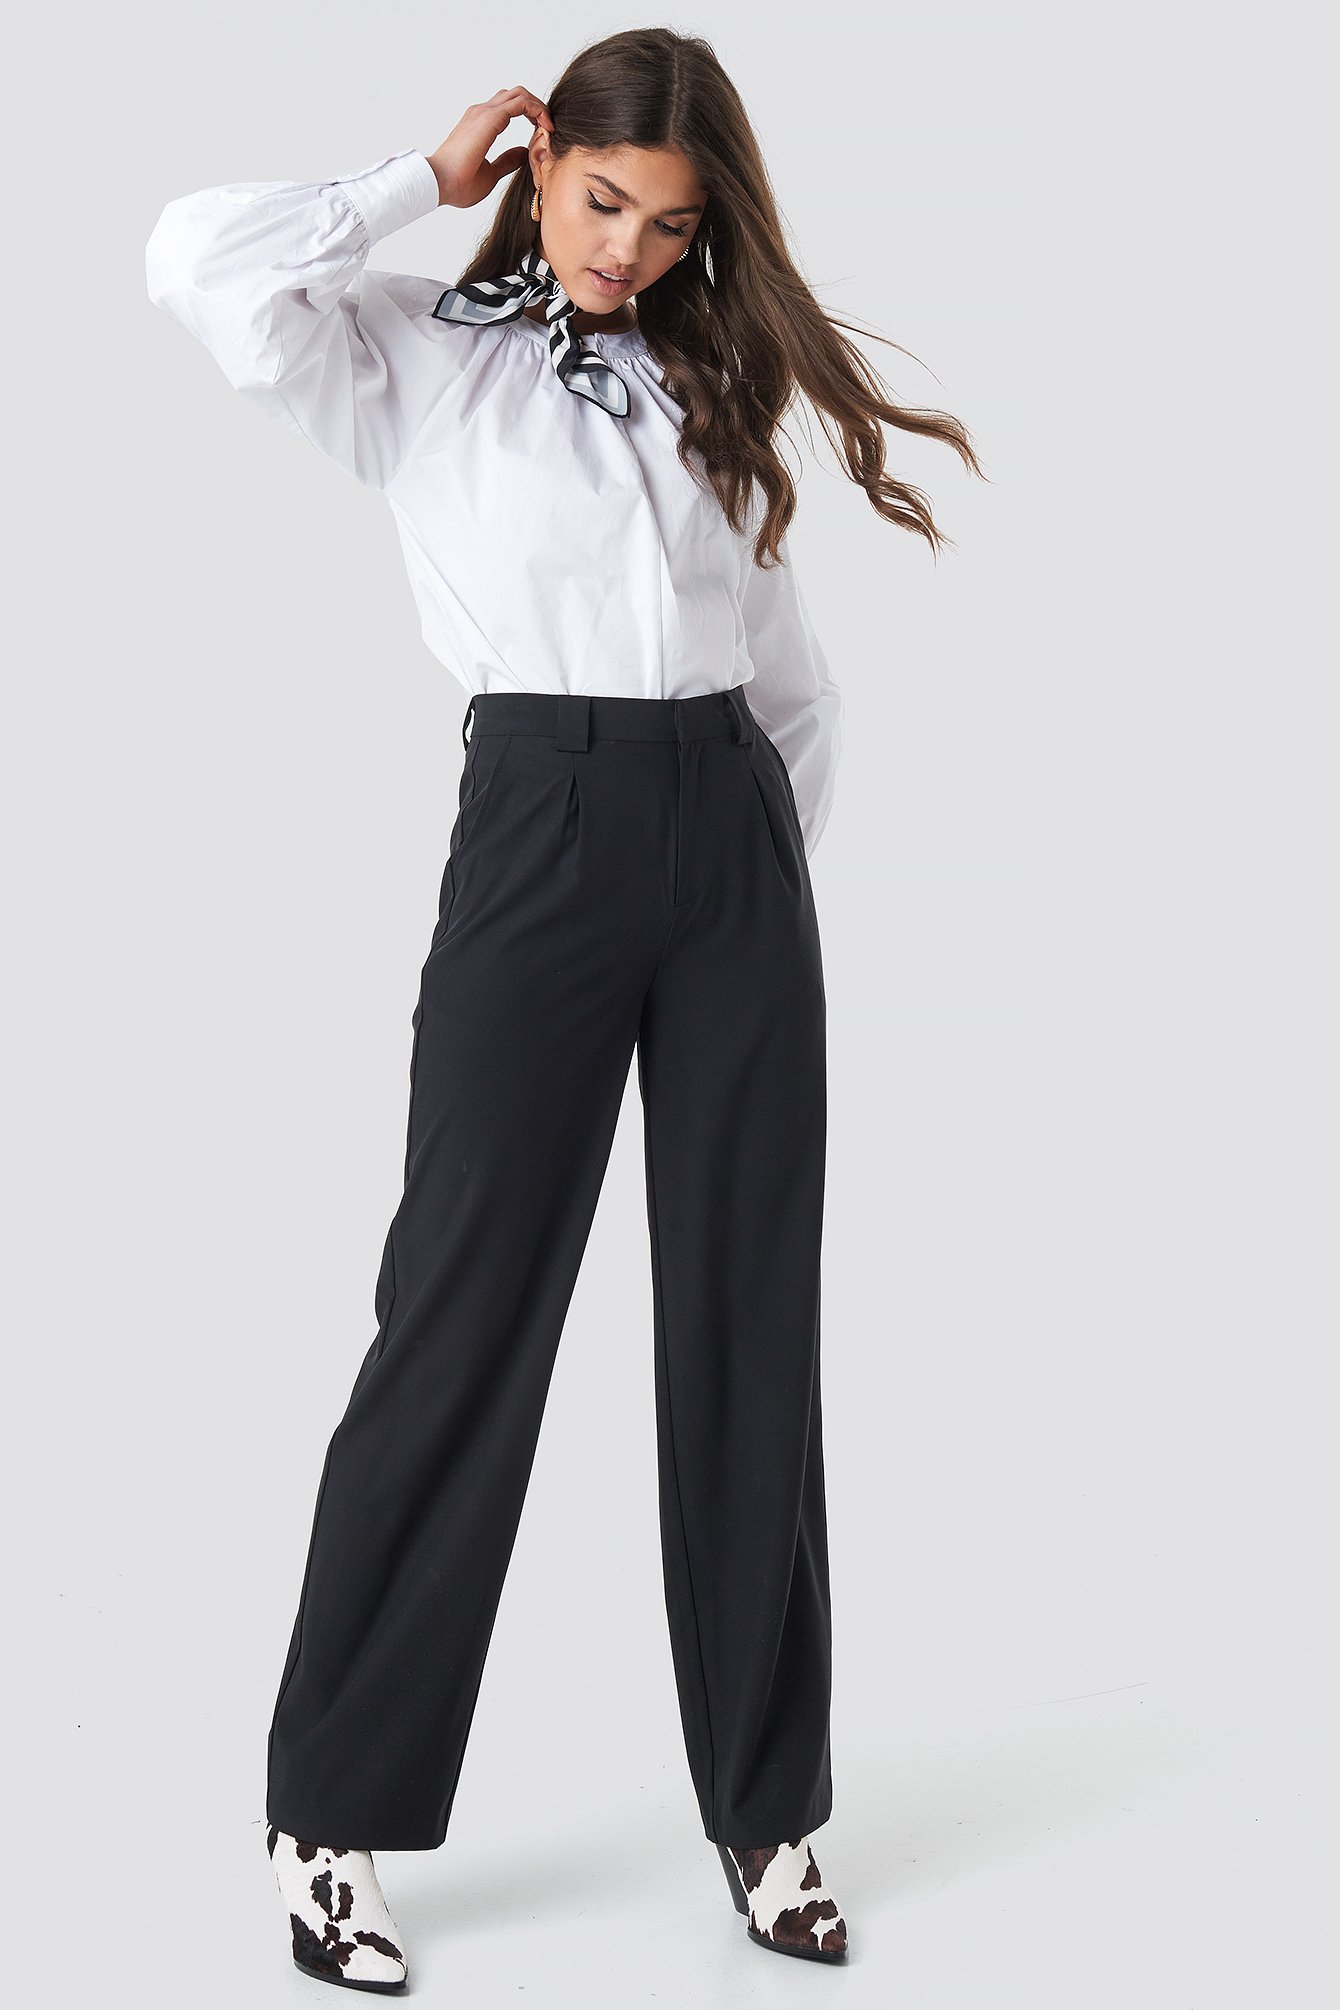 Black Loose Fitted Suit Pants